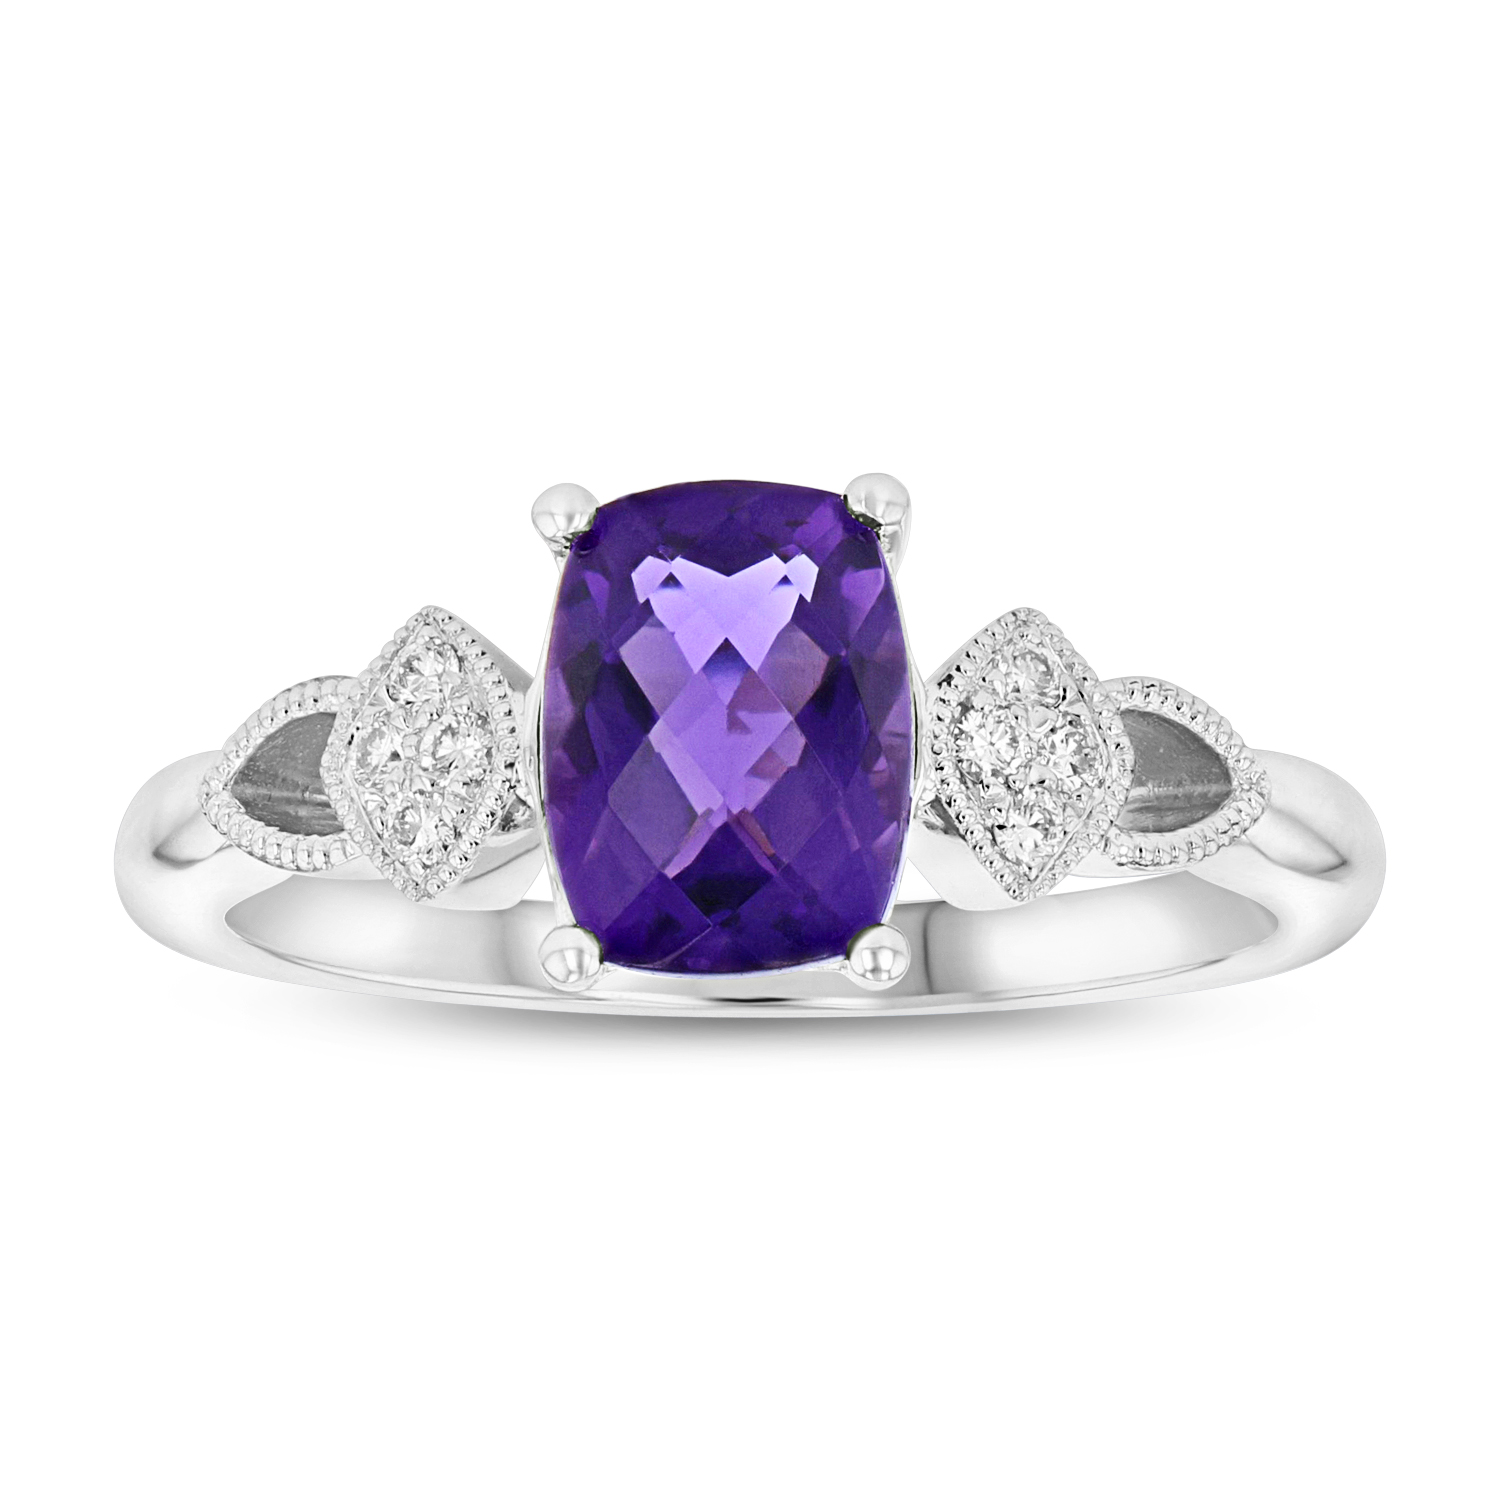 View Diamond and Amethyst ring in 14k White Gold